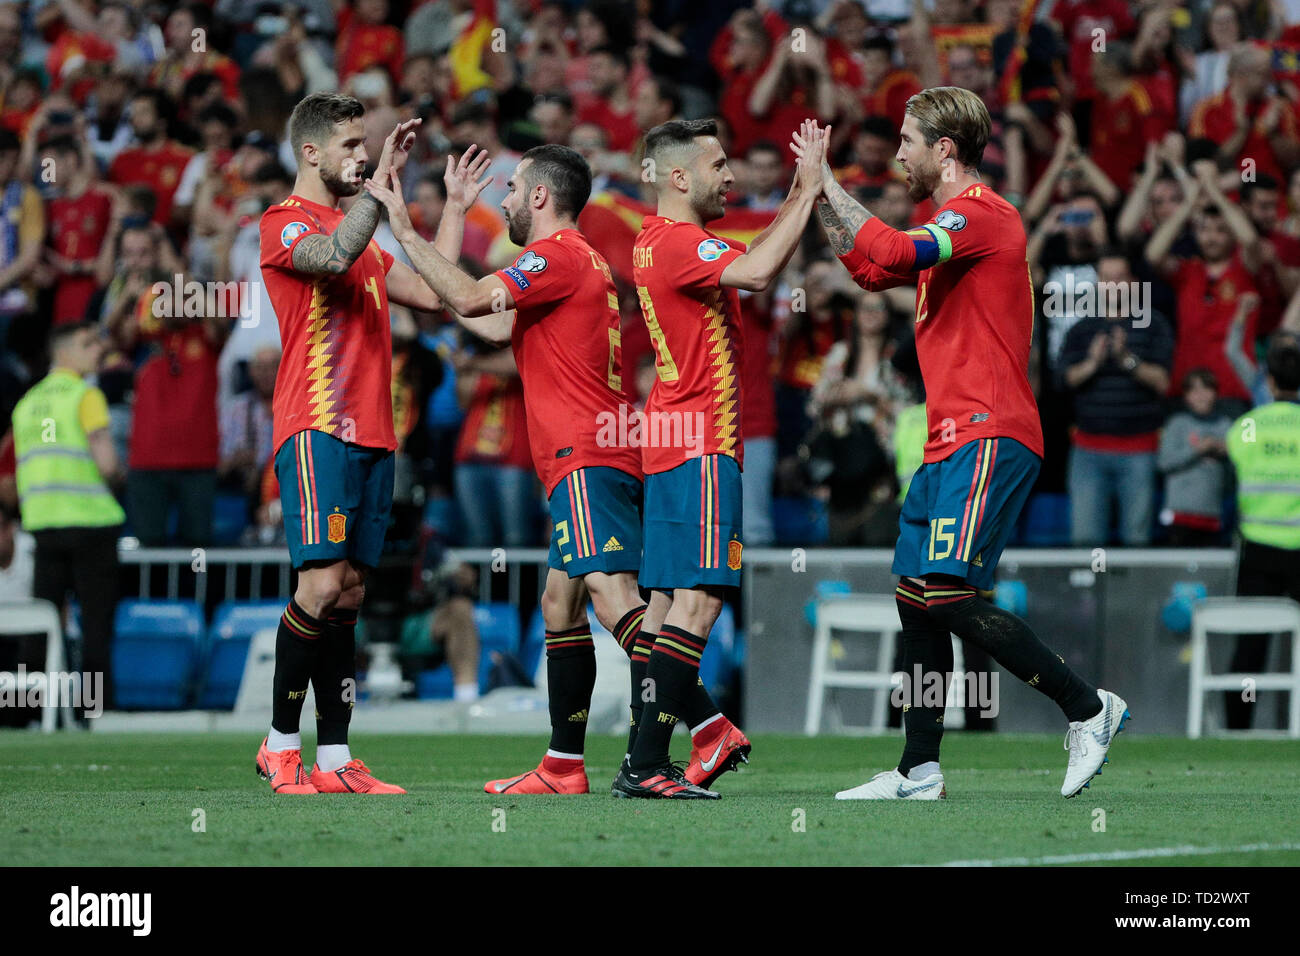 Spain national team players celebrate during the UEFA EURO 2020 Qualifier match between Spain and Sweden at Santiago Bernabeu Stadium in Madrid. Final score: Spain 3 - Sweden 0 Stock Photo